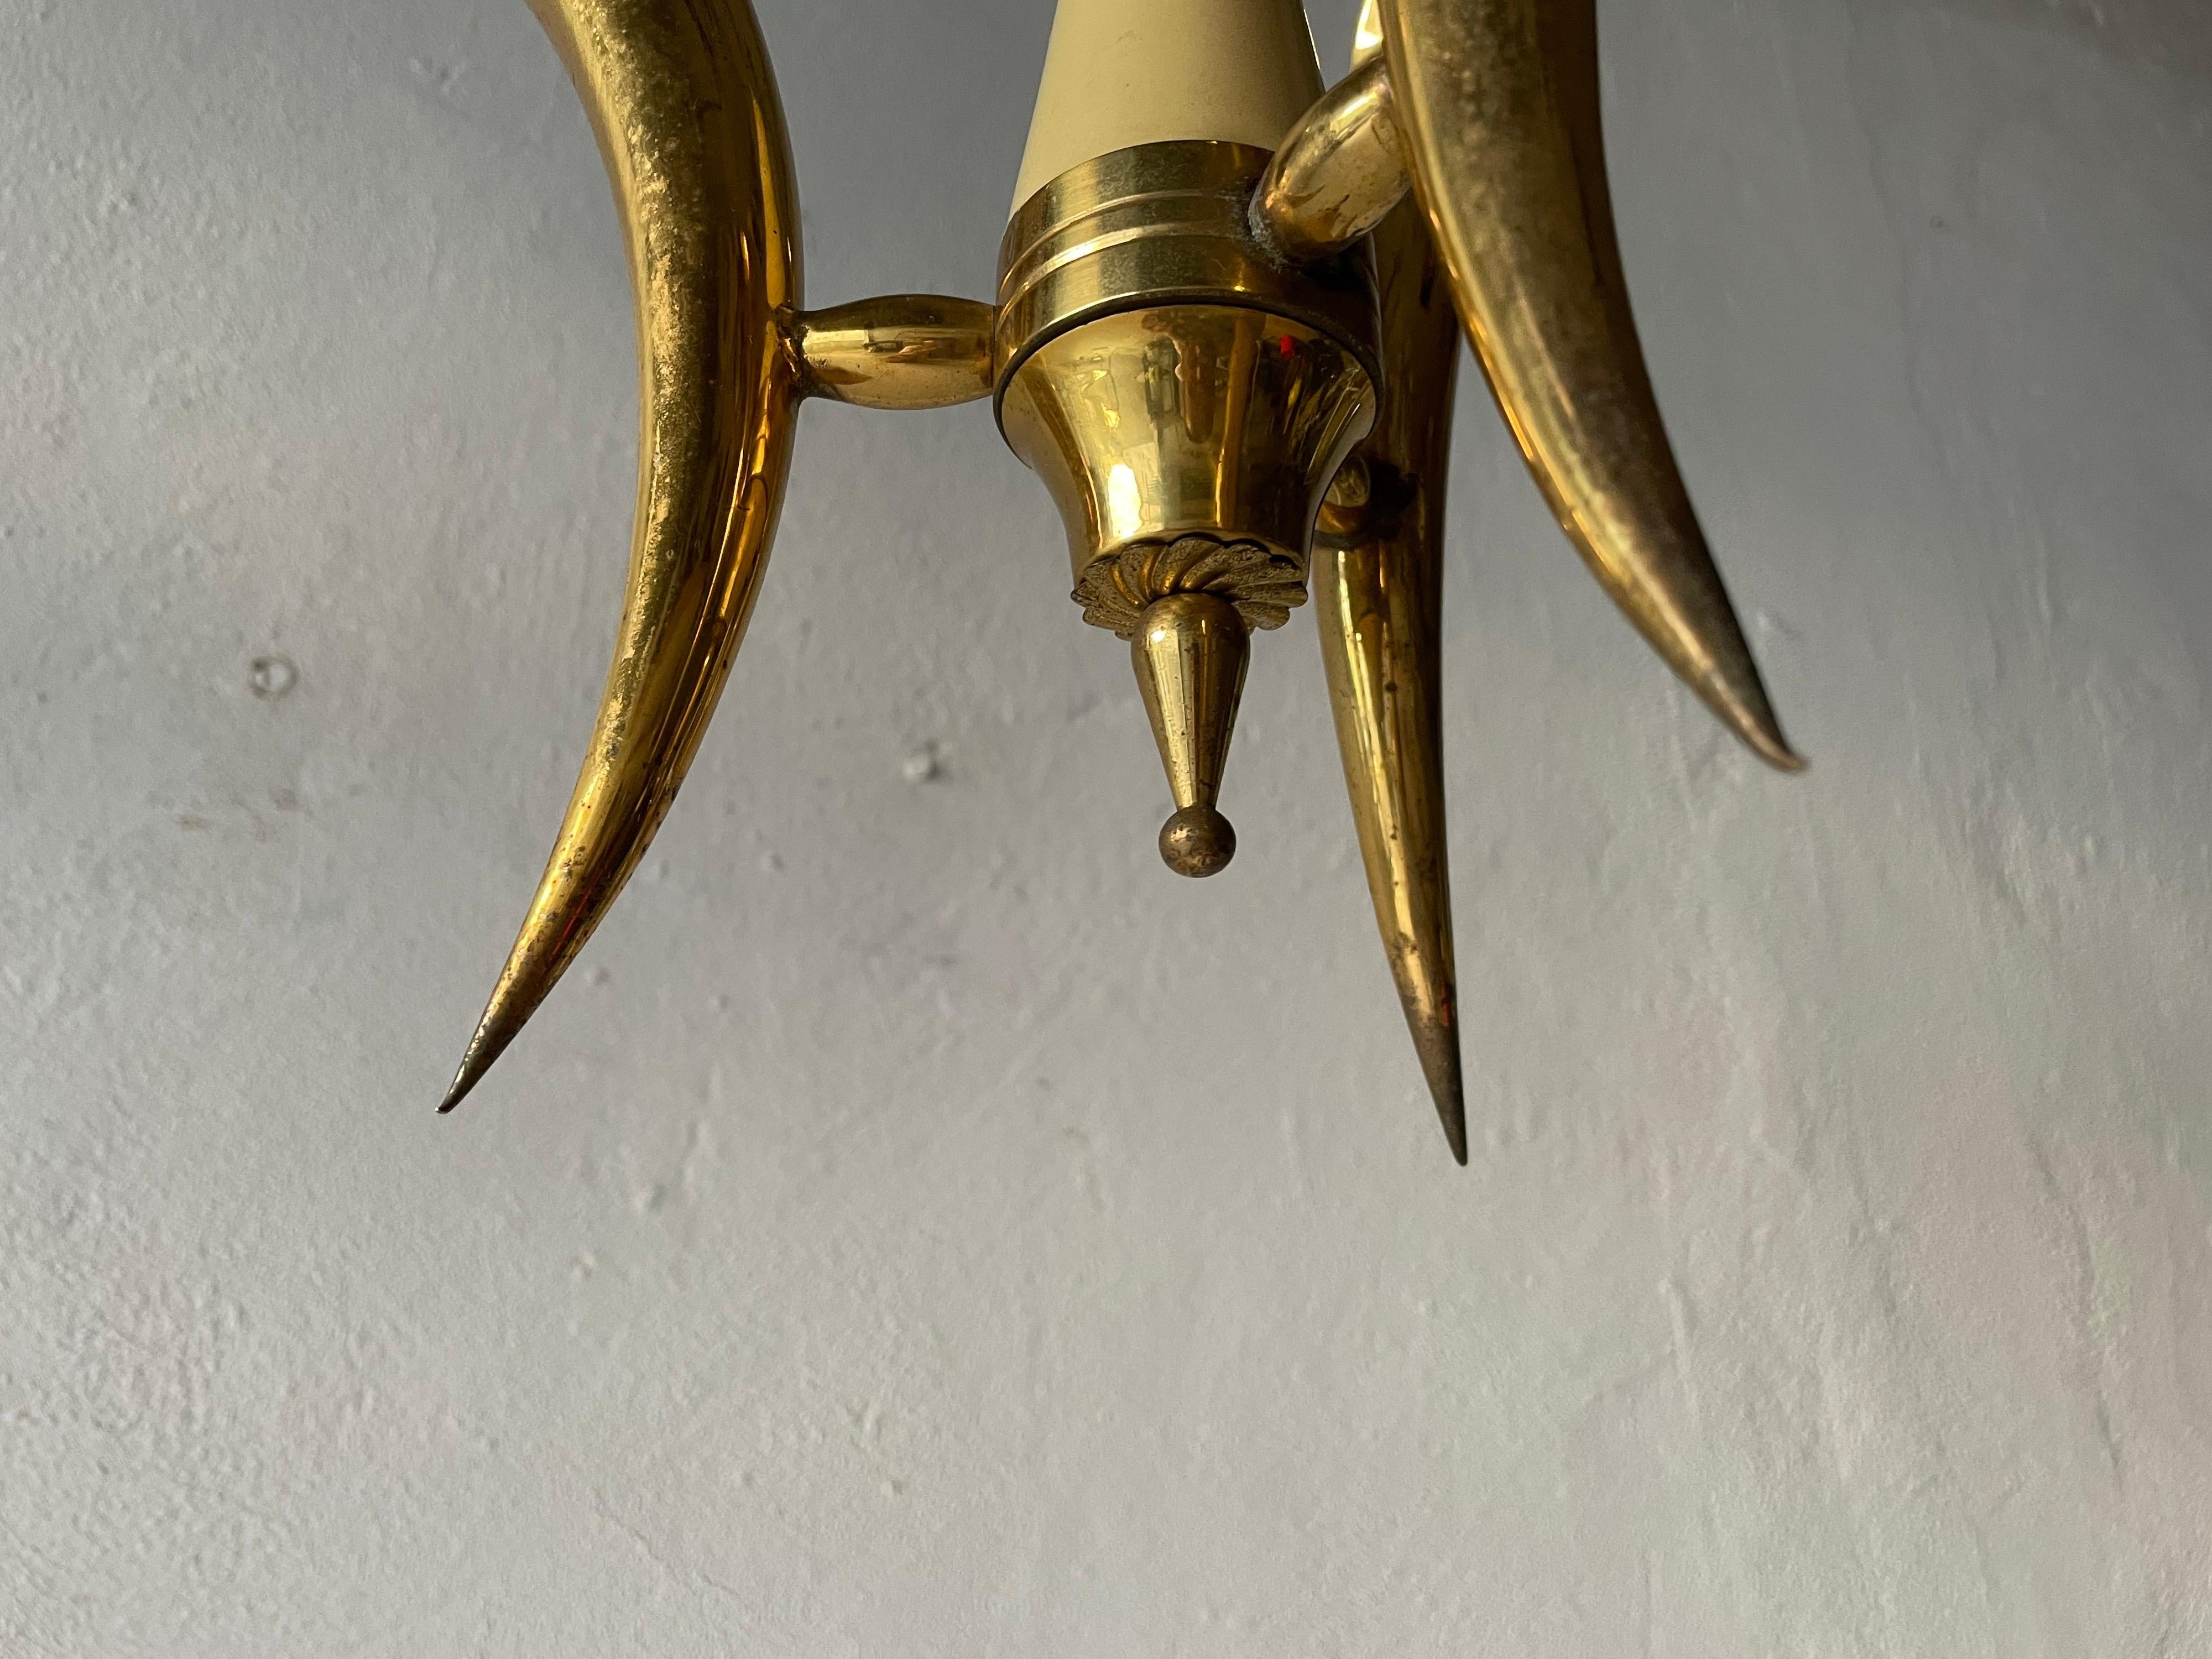 Triple Horn Brass Shade Mid-Century Modern Chandelier, 1950s, Italy For Sale 3